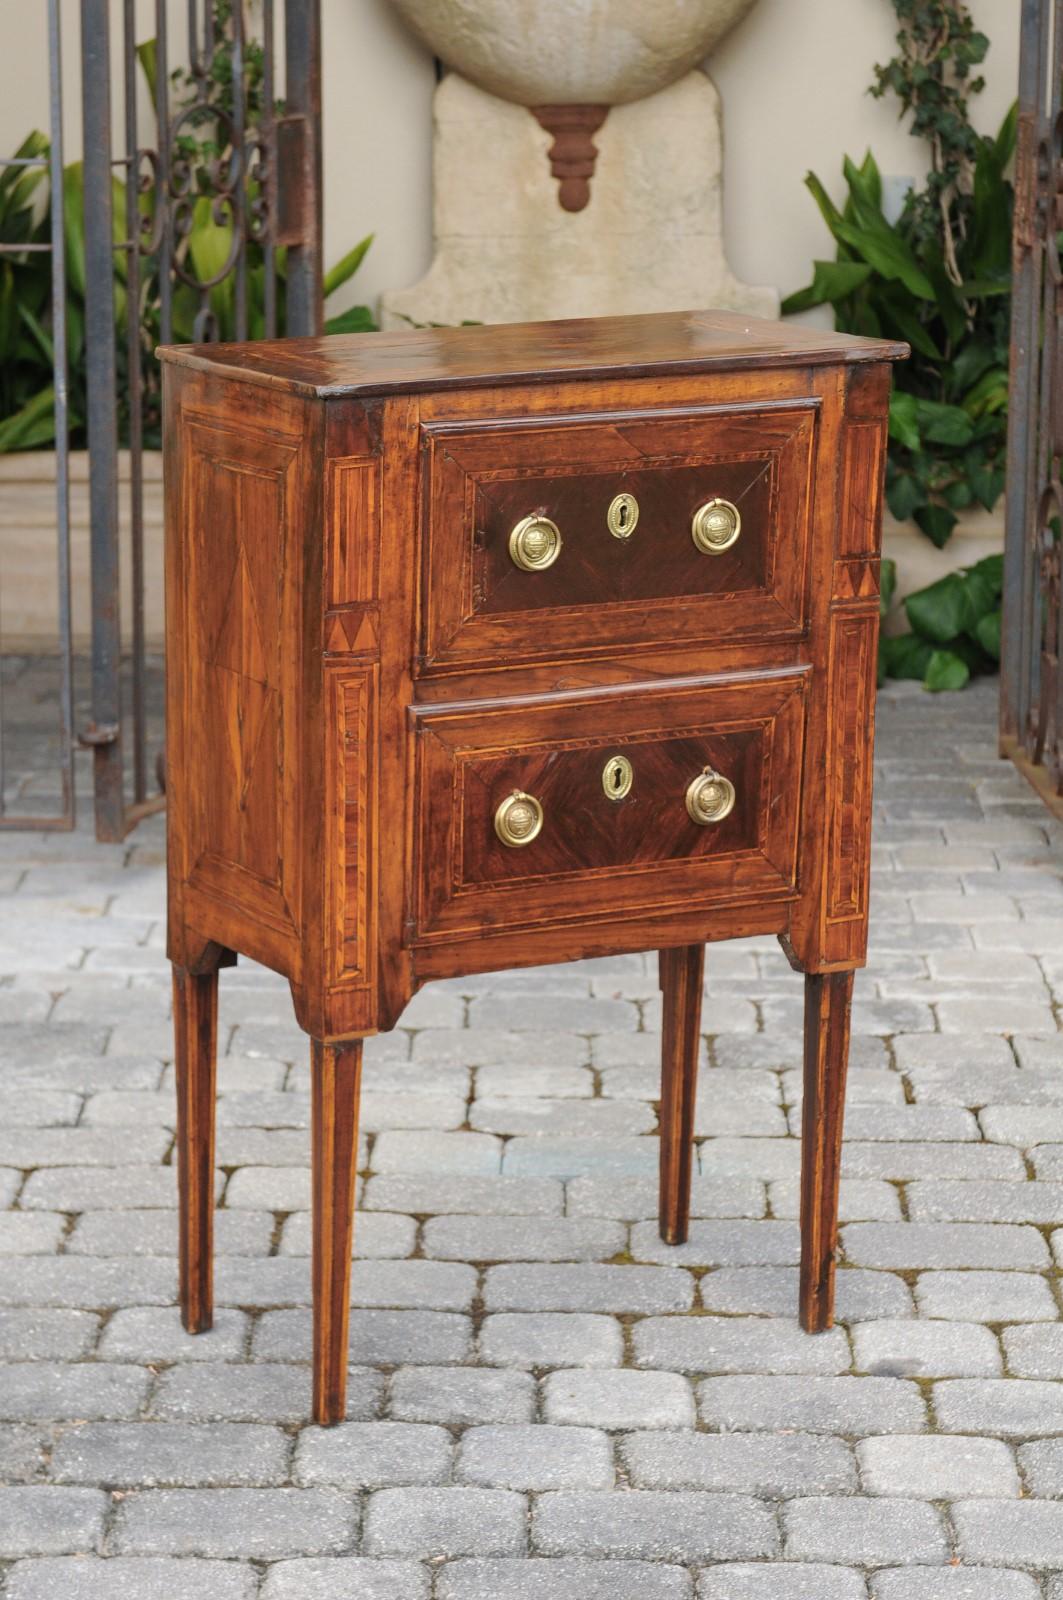 Petite Italian Neoclassical Period Walnut Commode circa 1800 with Inlaid Décor For Sale 1